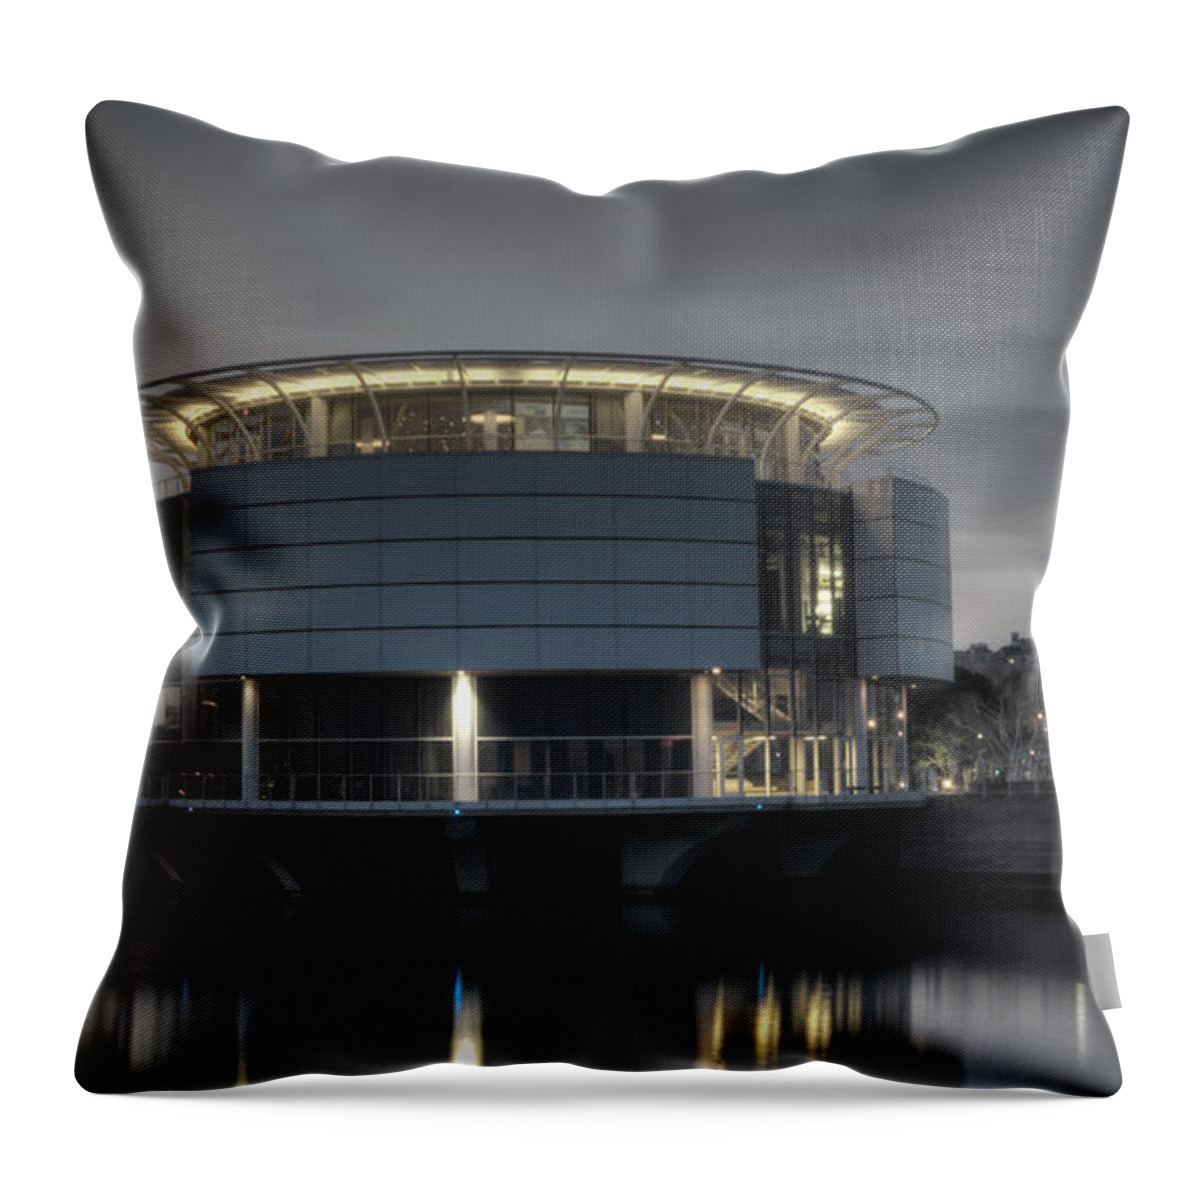 City Throw Pillow featuring the photograph City Glare by Deborah Klubertanz